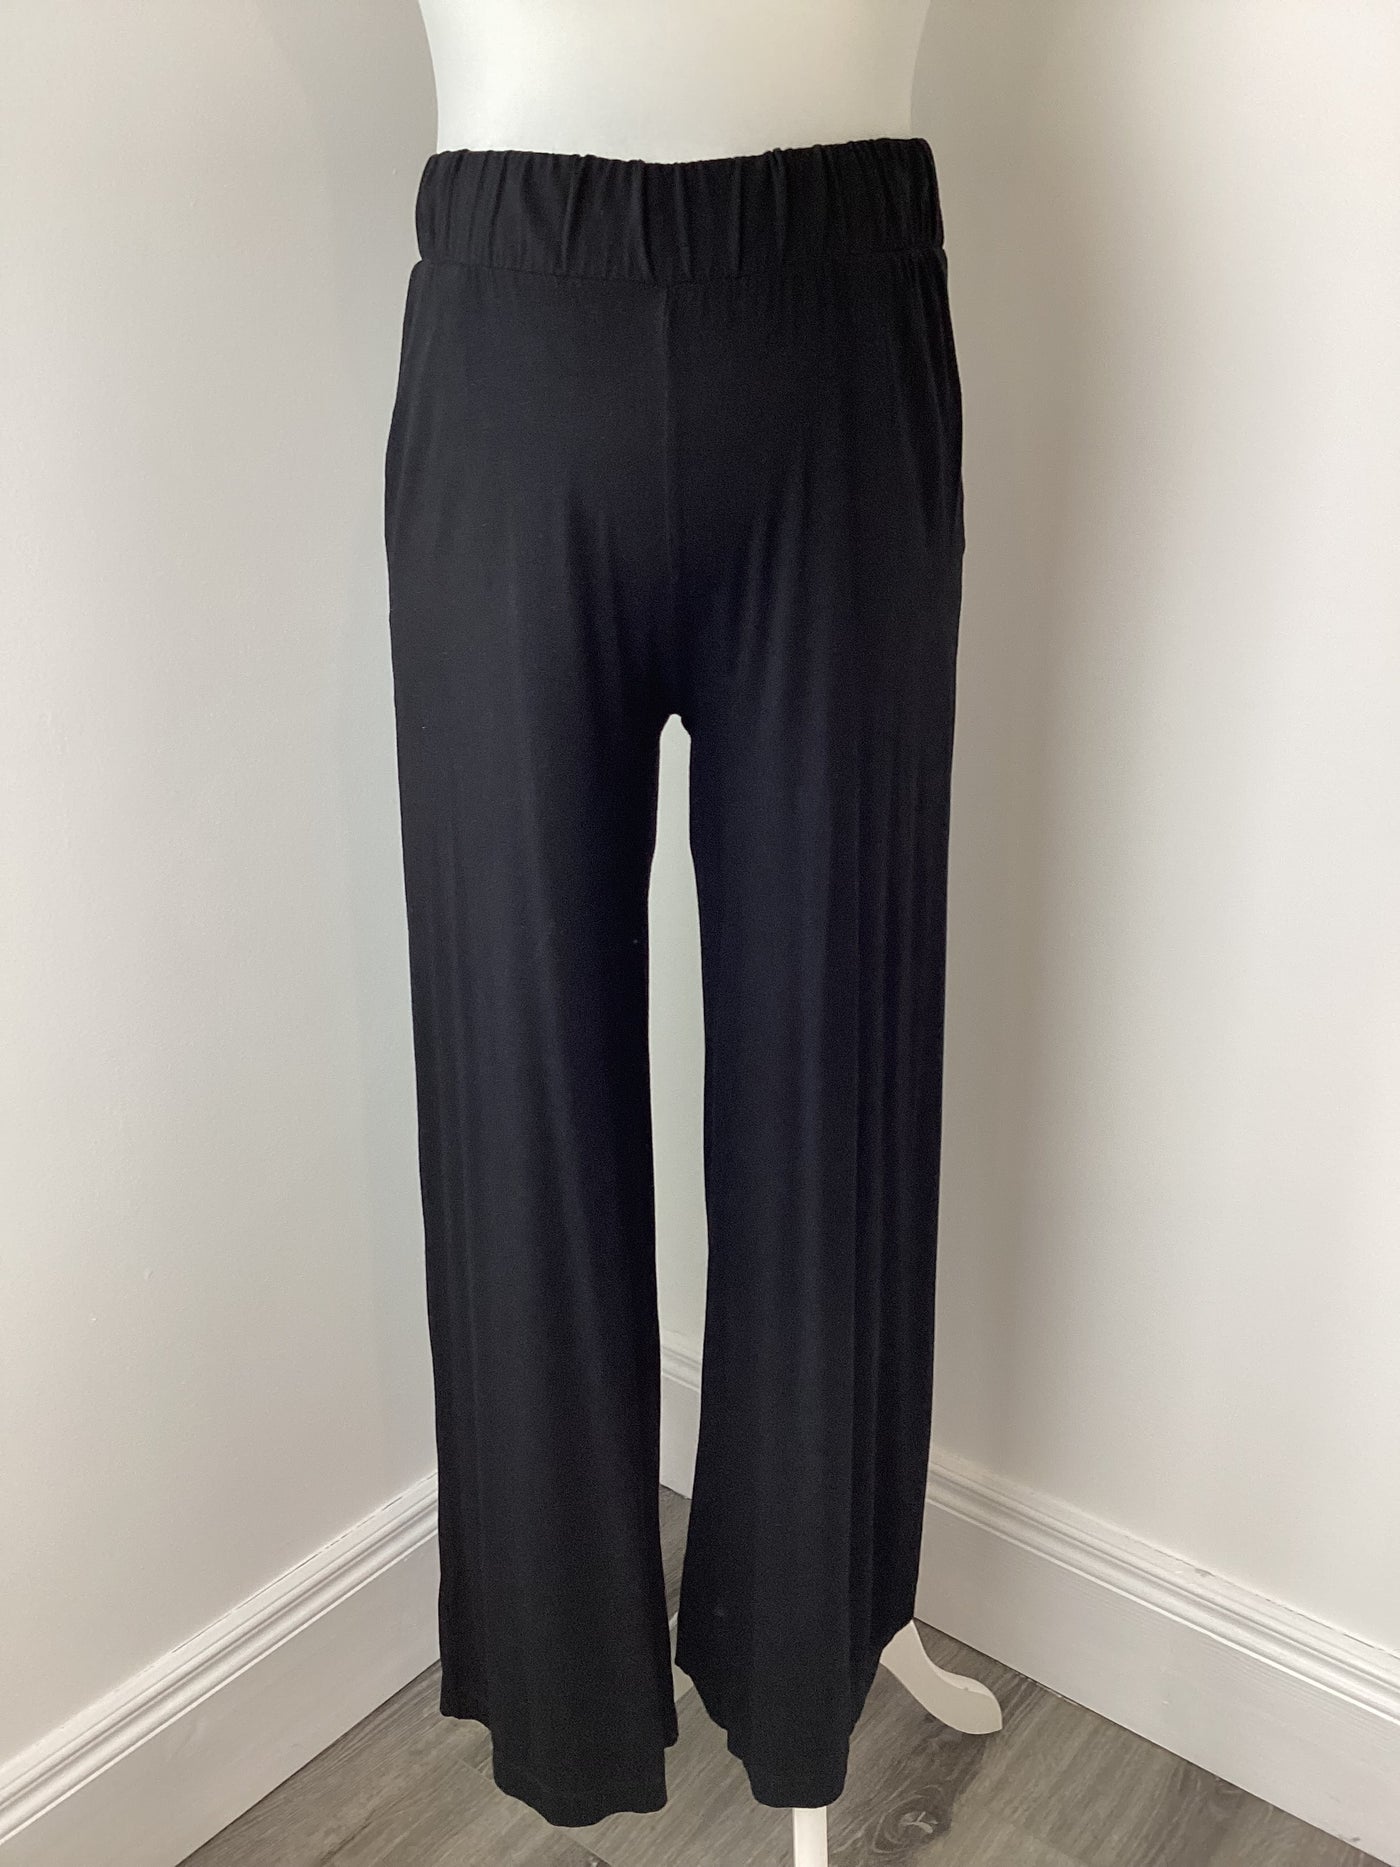 Isabella Oliver black lounge pants with pockets - Size 2 (Approx UK 10)